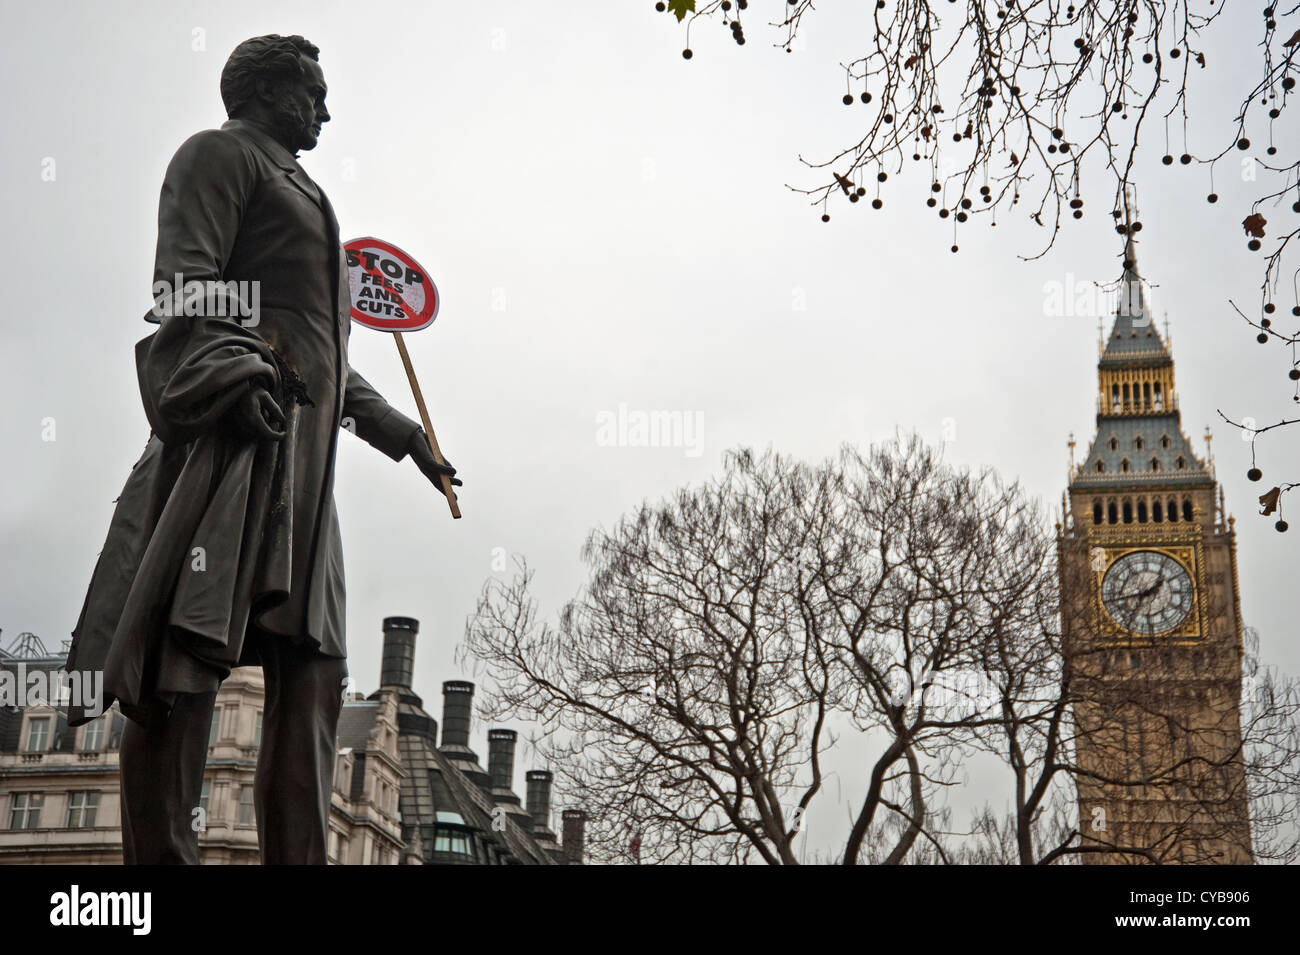 Statue in Parliament Square with Student Protest sign Stock Photo